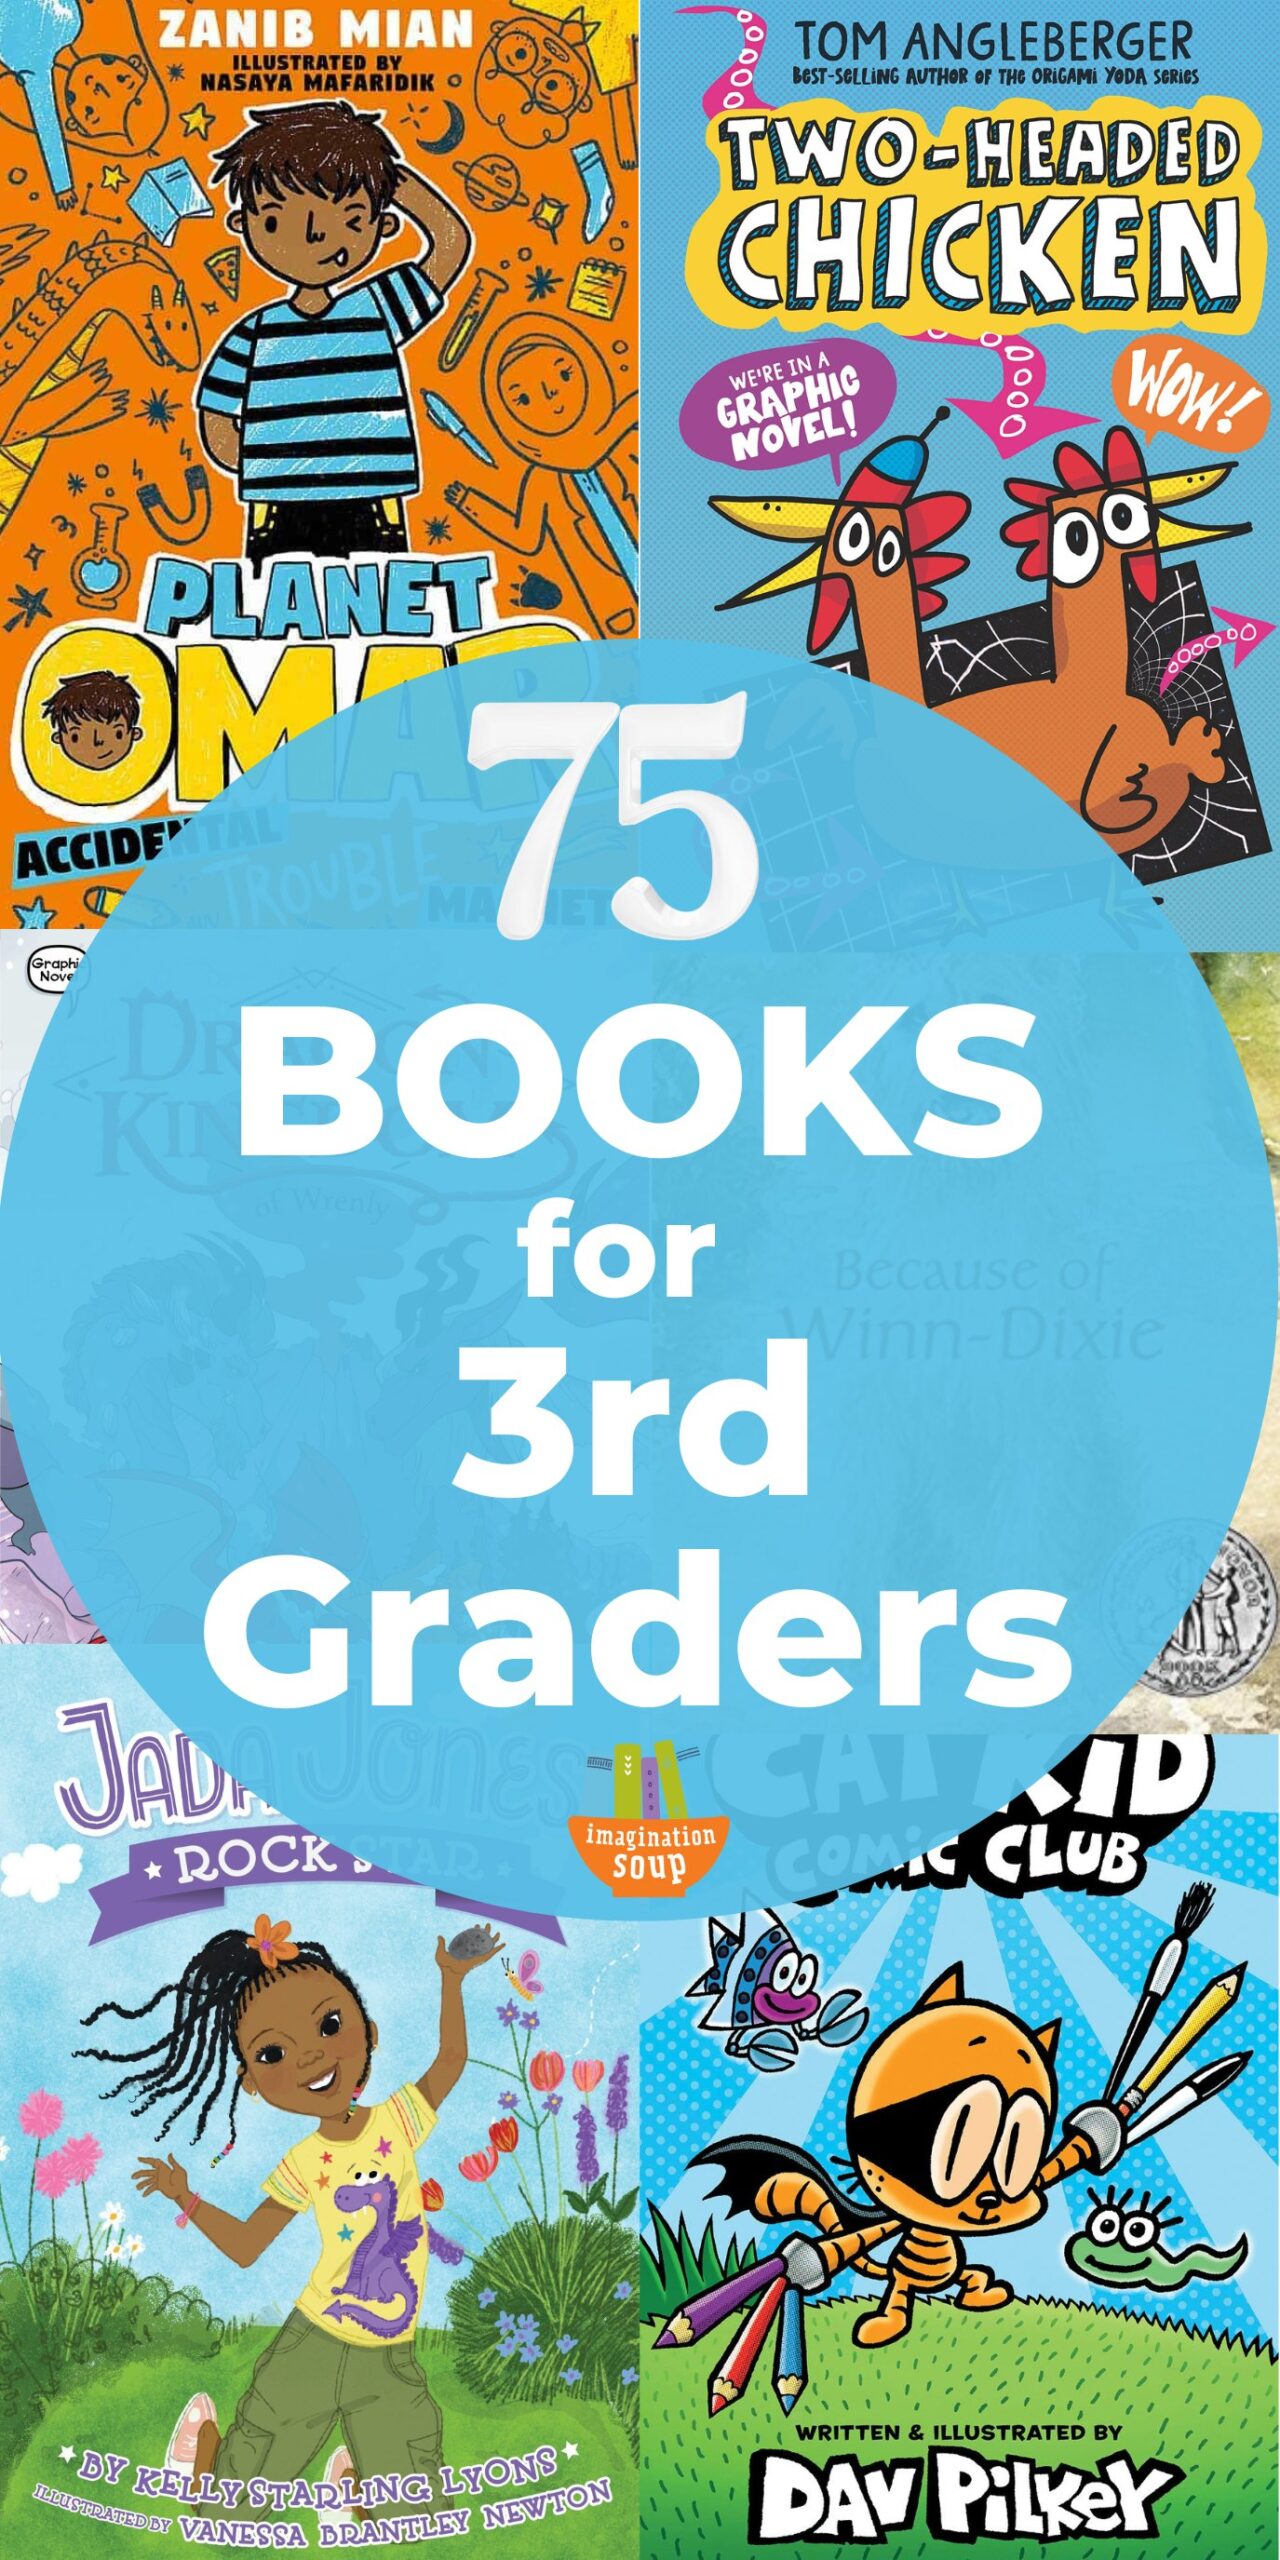 Are you looking for the best chapter books for 3rd graders, 8-year-old boys and girls? I can help you find good books that are at their maturity and reading level and your children will love. This list shares my top recommended books with reviews so you can read more about them. Plus, you can download the most popular books on this list.